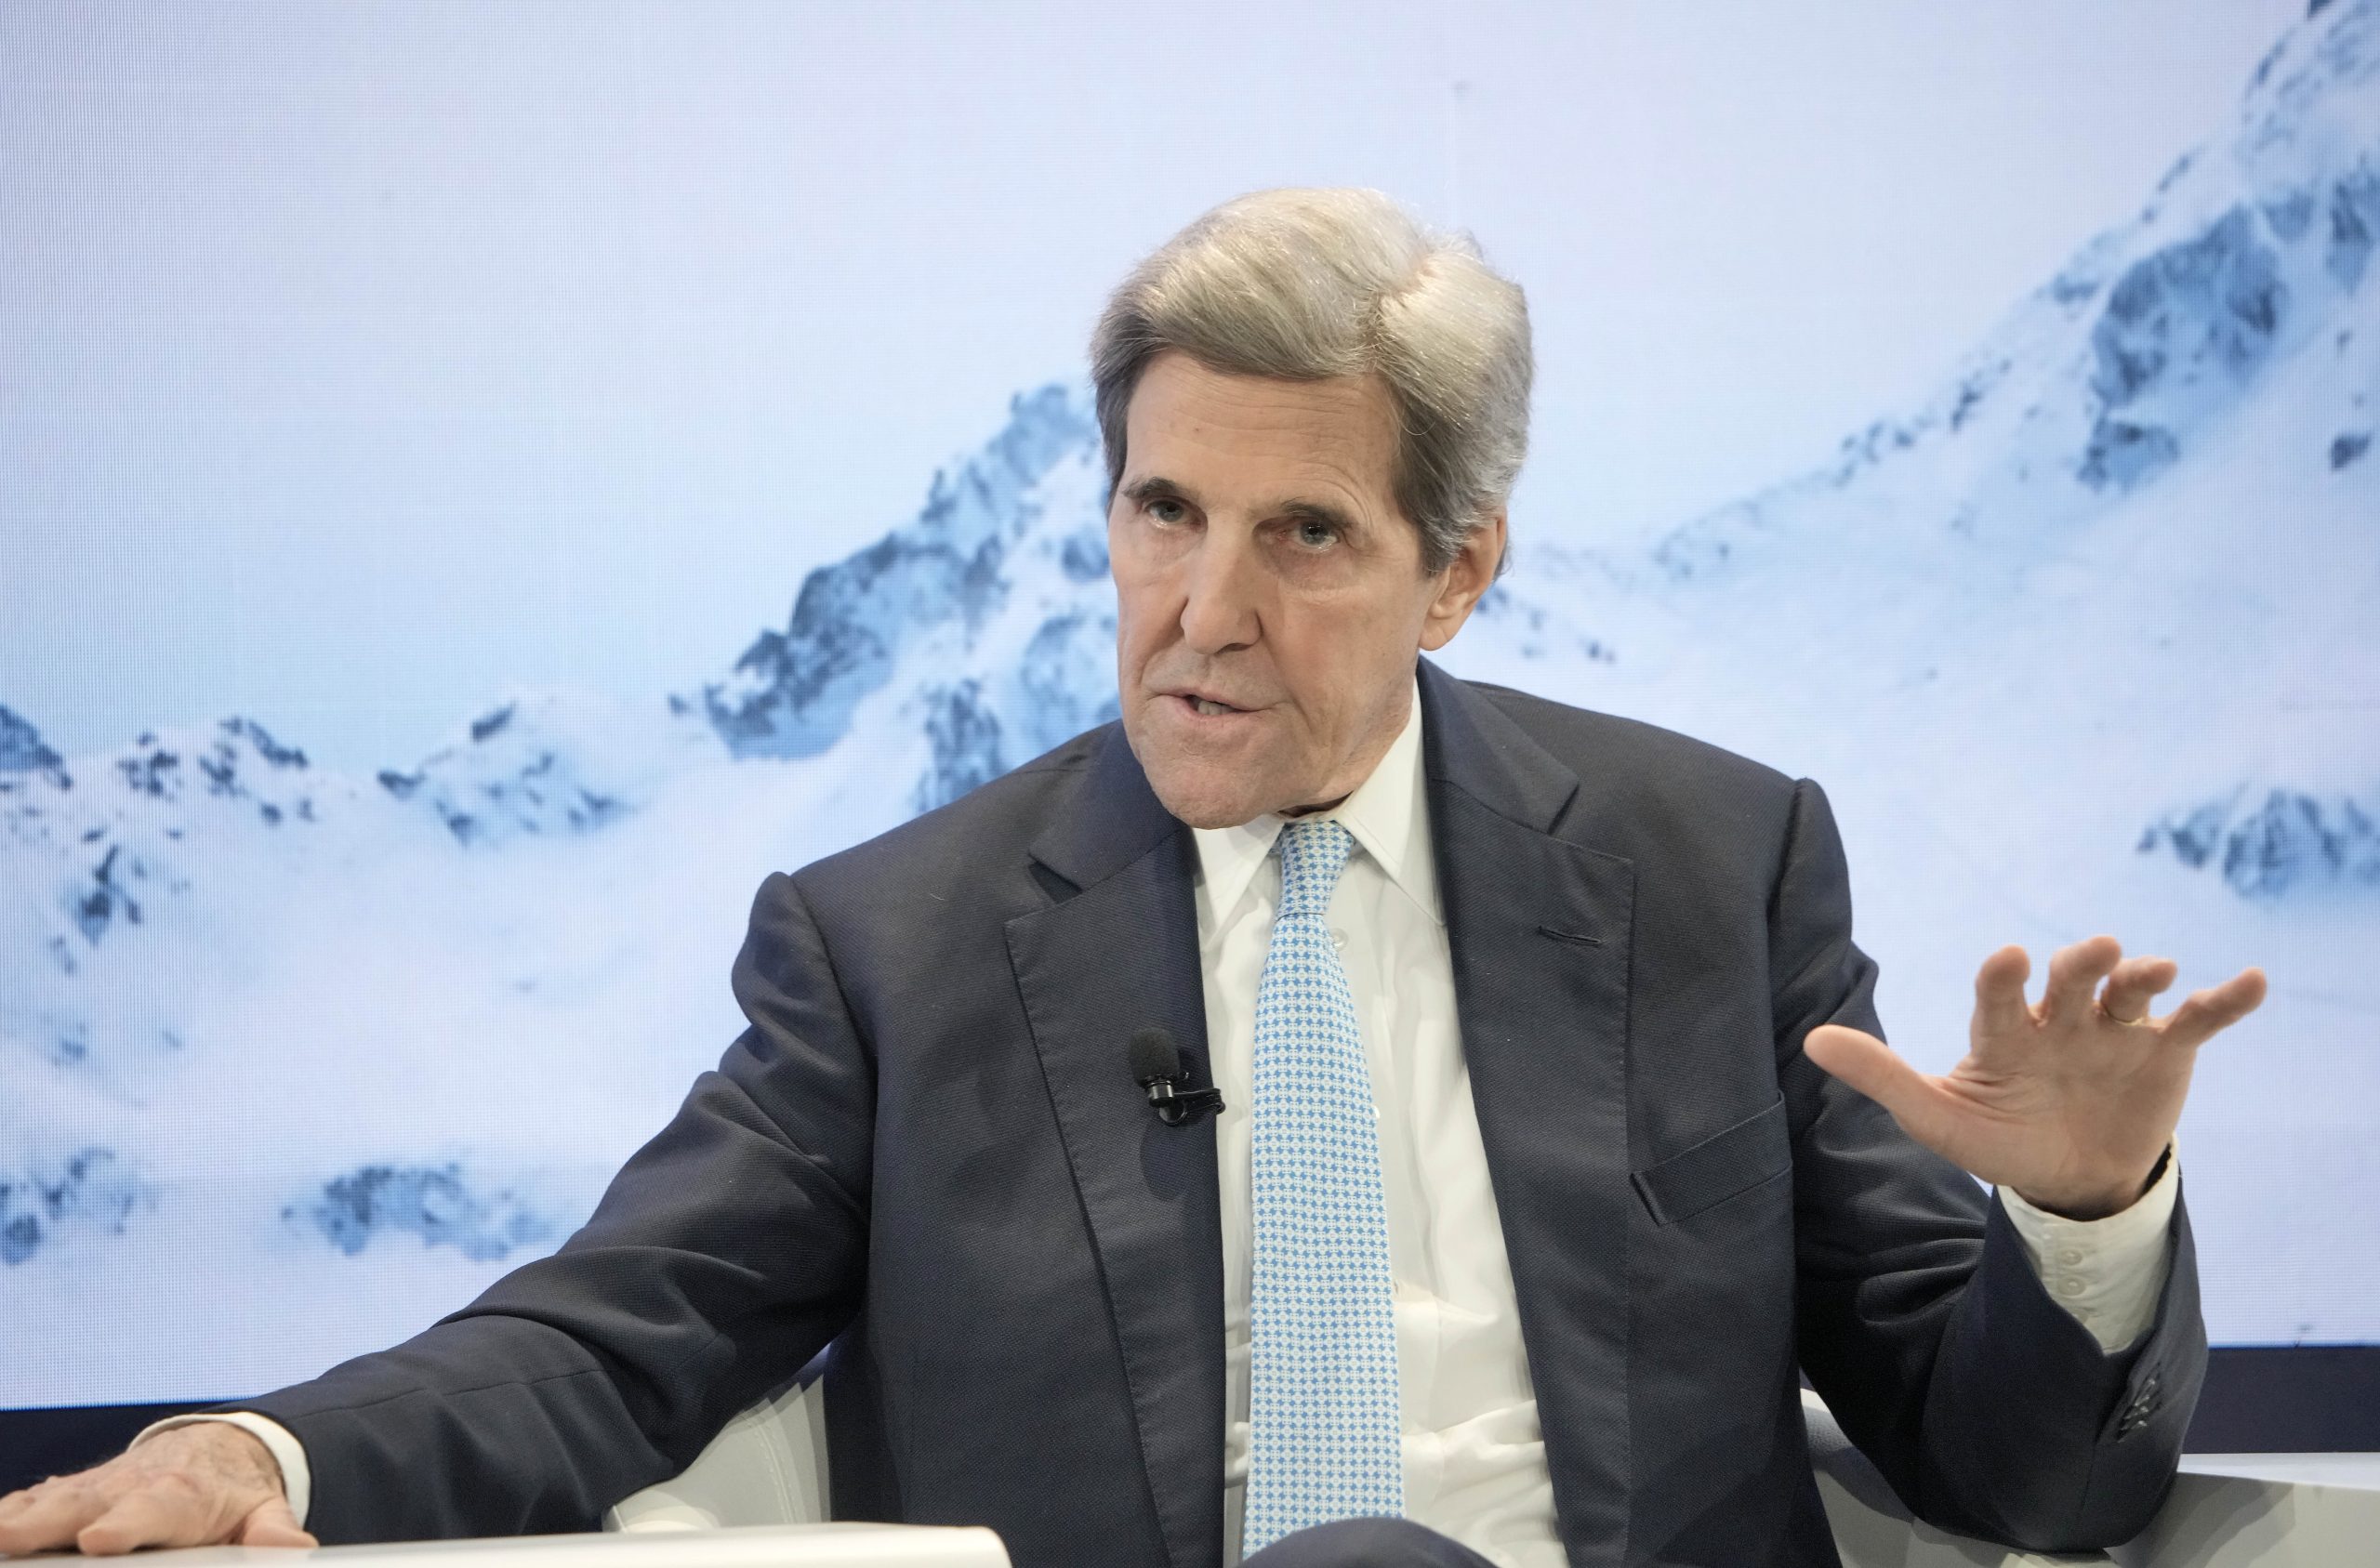 Kerry to stay on as Biden’s top climate diplomat